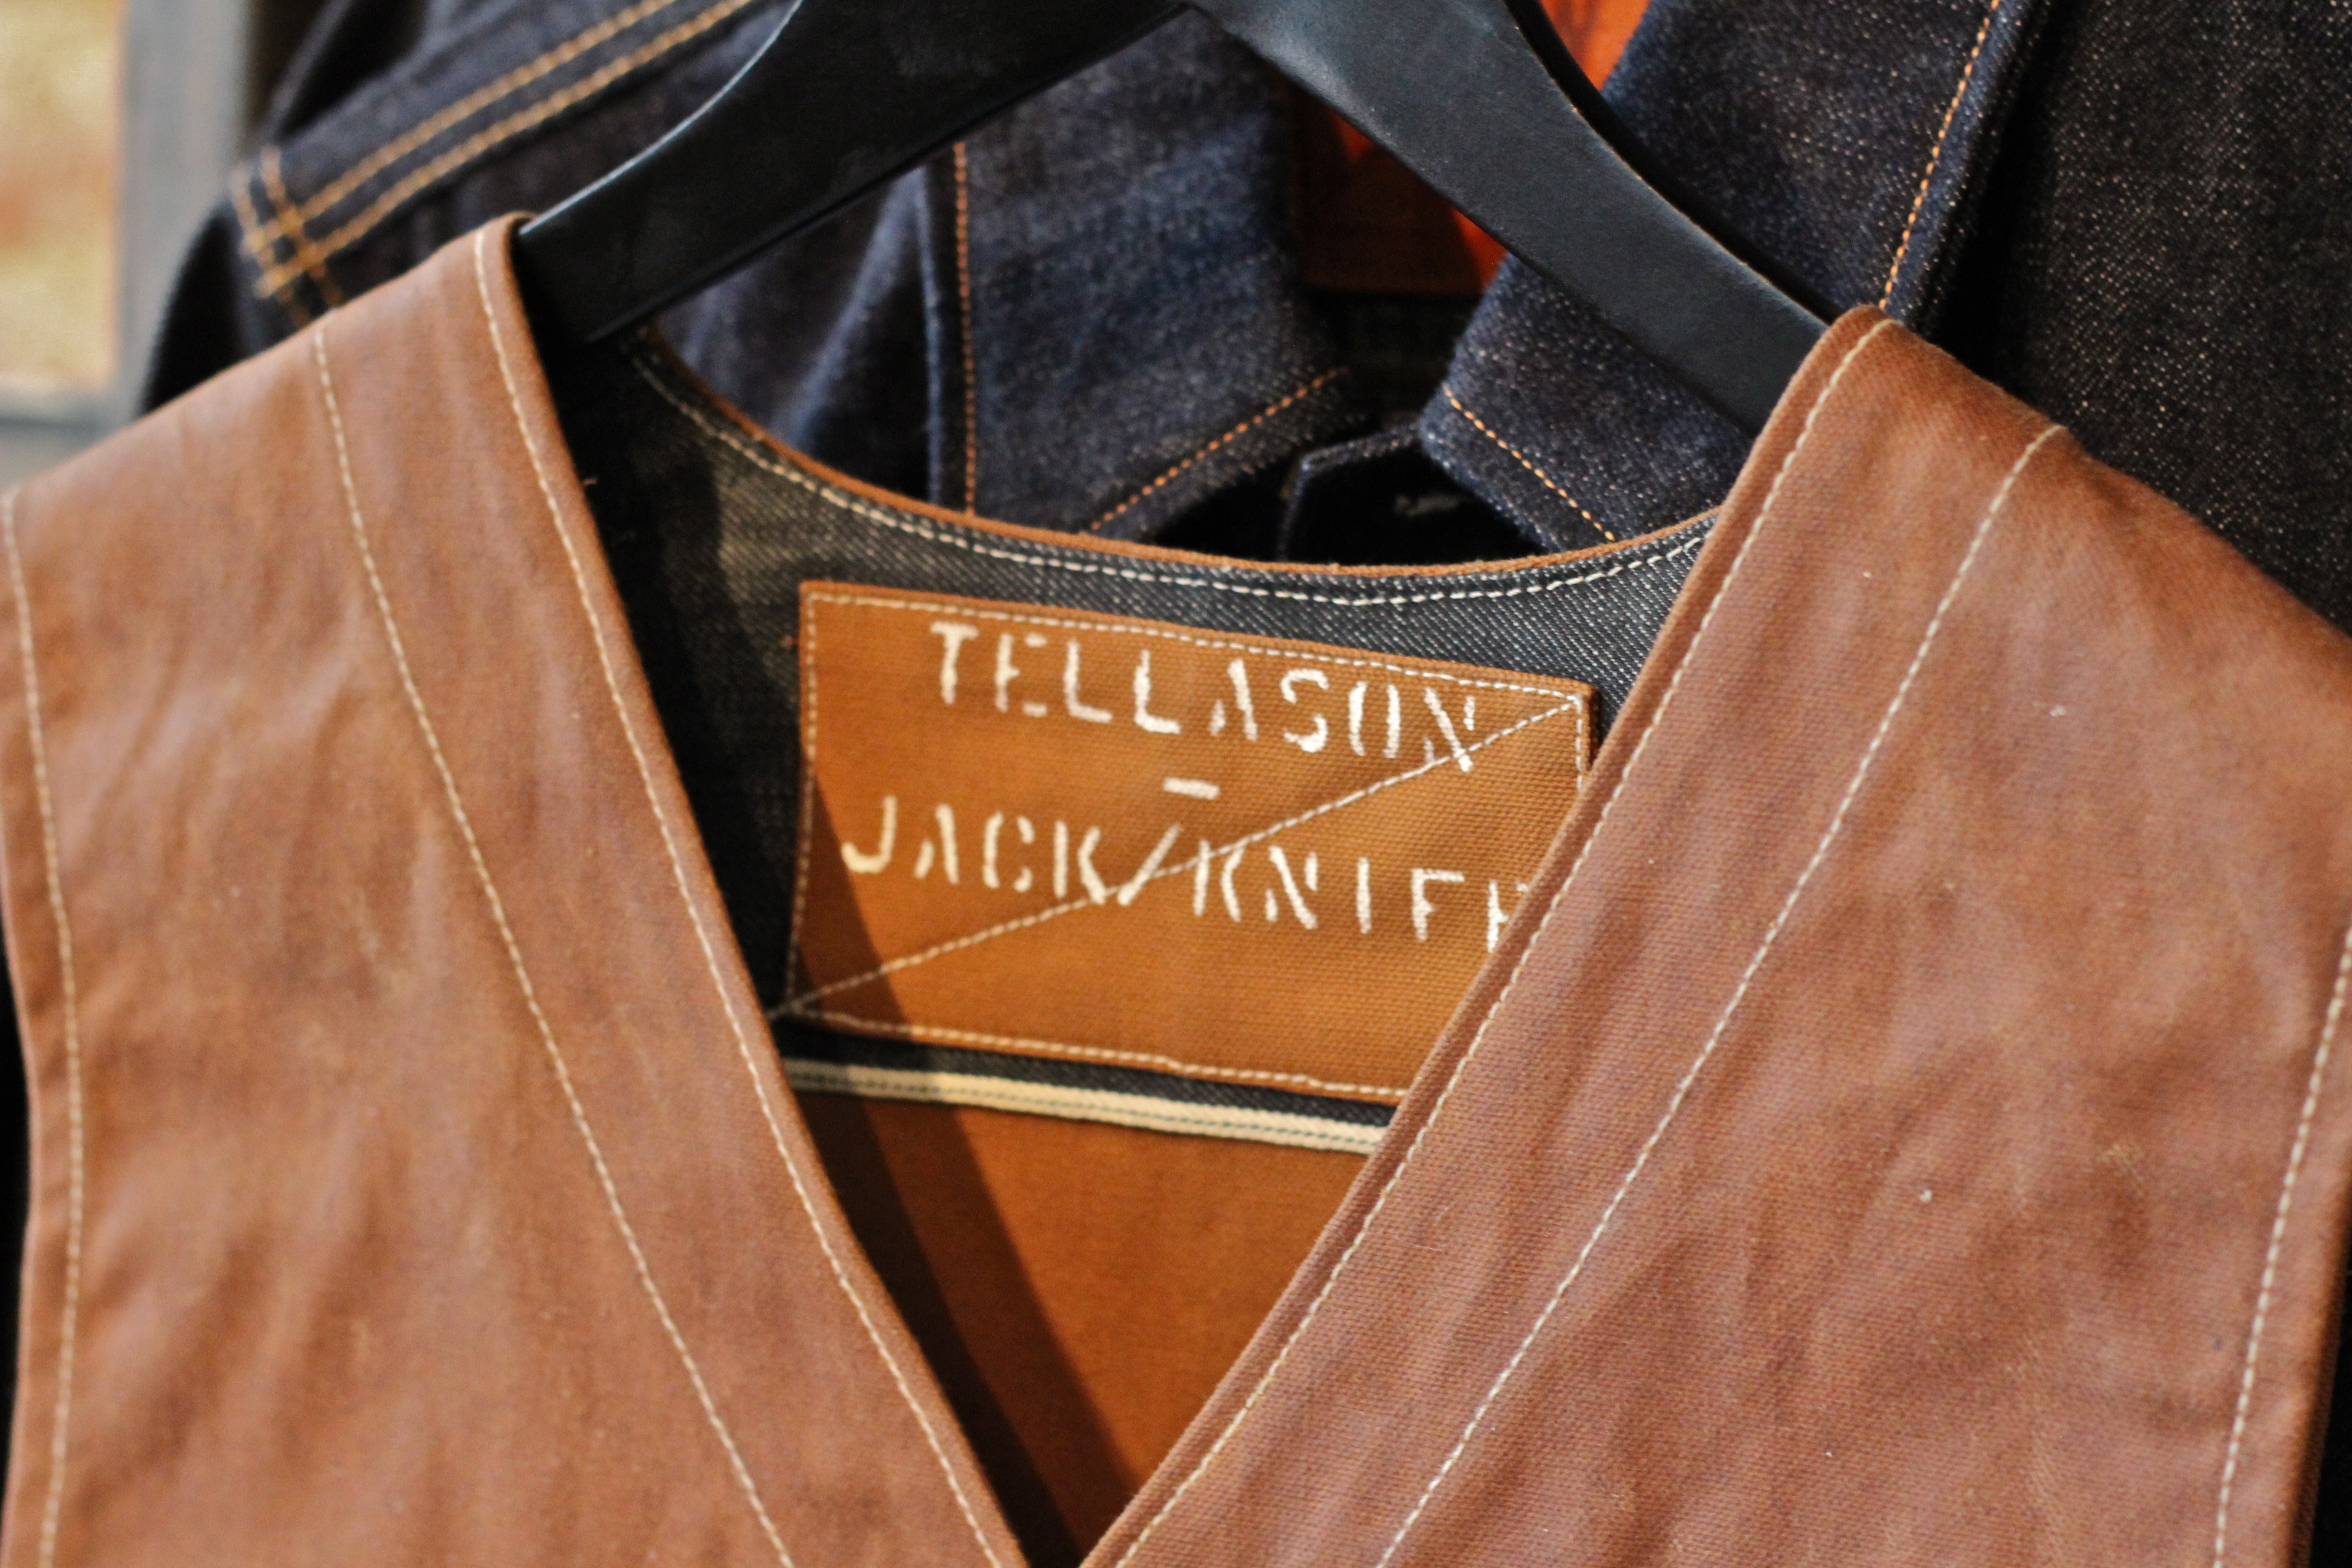 How To Age Vegetable-Tanned Leather Perfectly